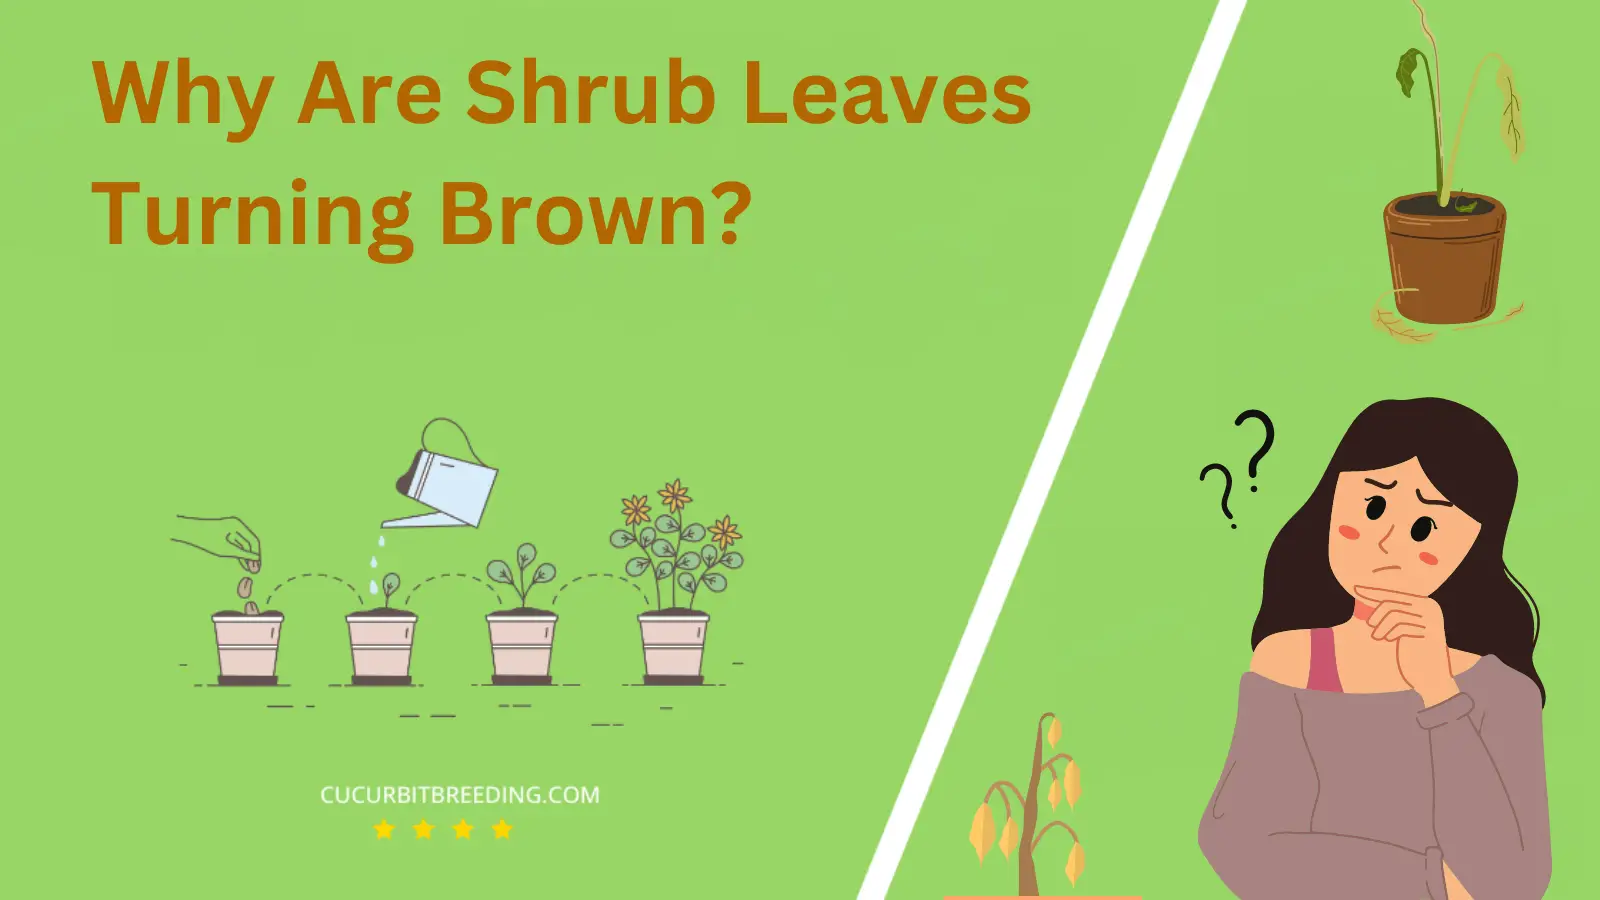 Why Are Shrub Leaves Turning Brown